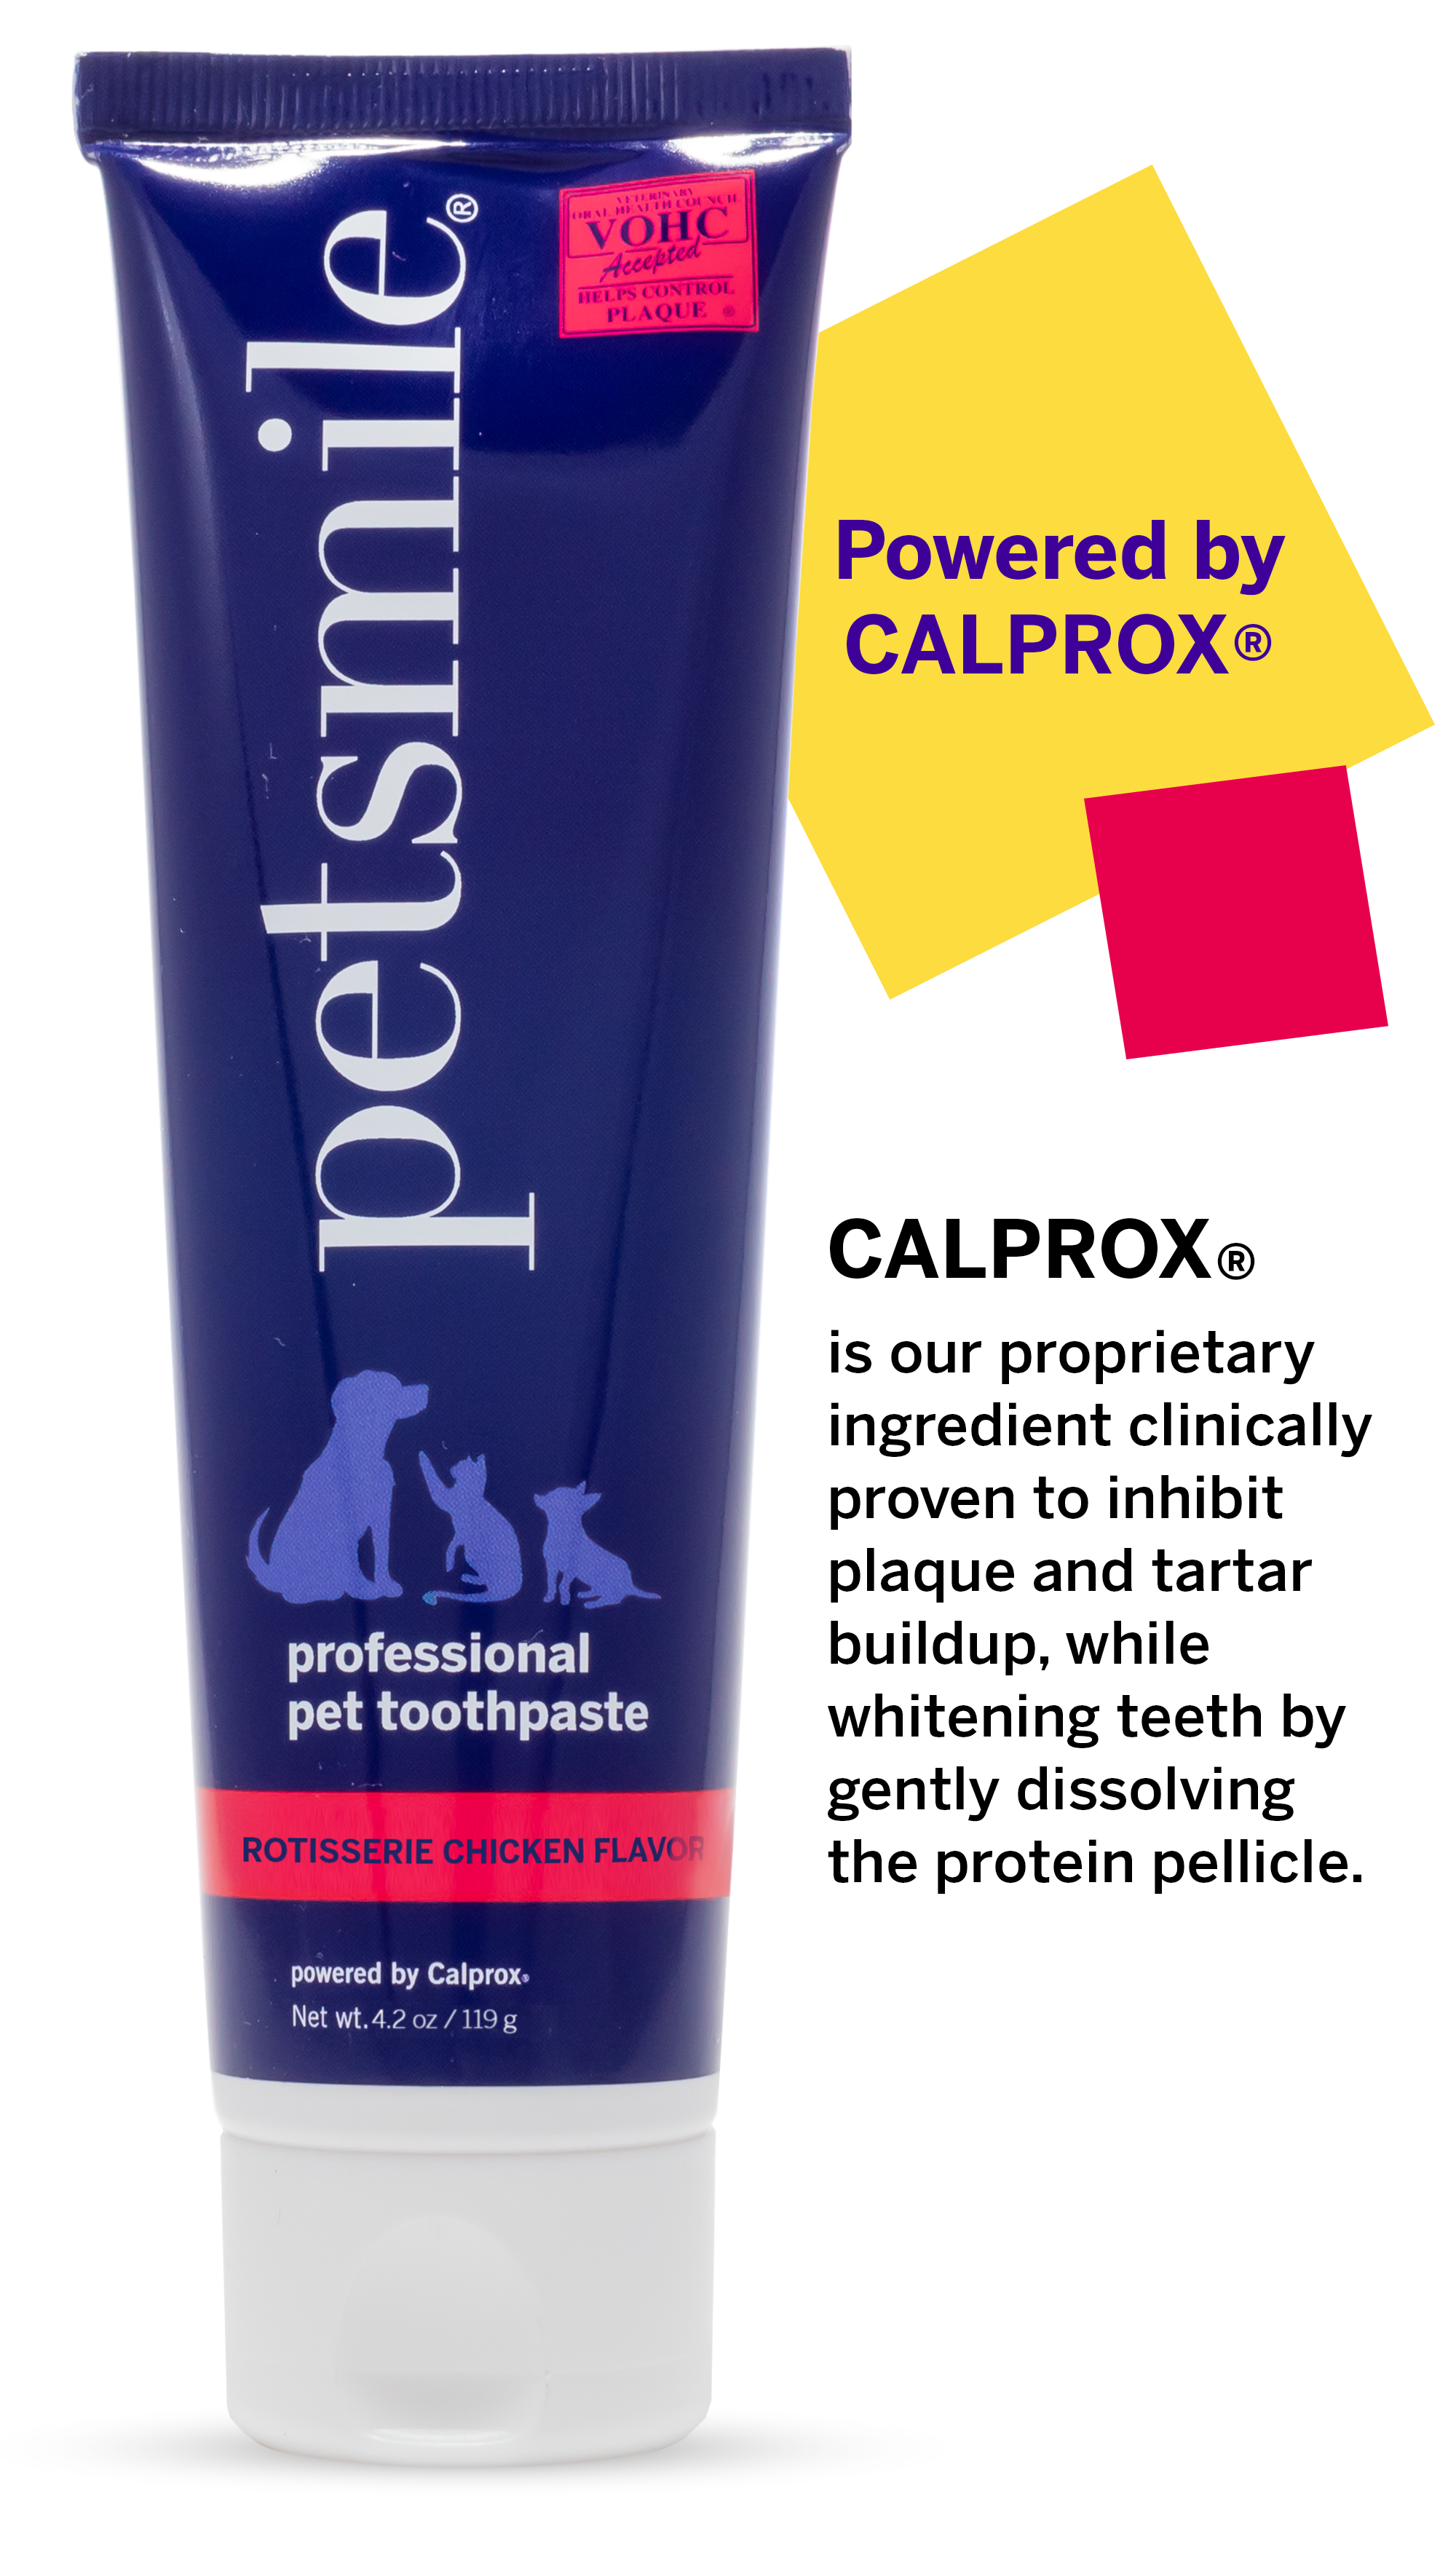 Large petsmile dog toothpaste with Calprox , Large puruple tube of chicken toothpaste , 4.2 OZ of petsmile professional dog toothpaste , Natural ingredients, Calprox powered , Clinically proven, Rotisserie Chicken Flavor , Large tube, BPA-free, fresh breath